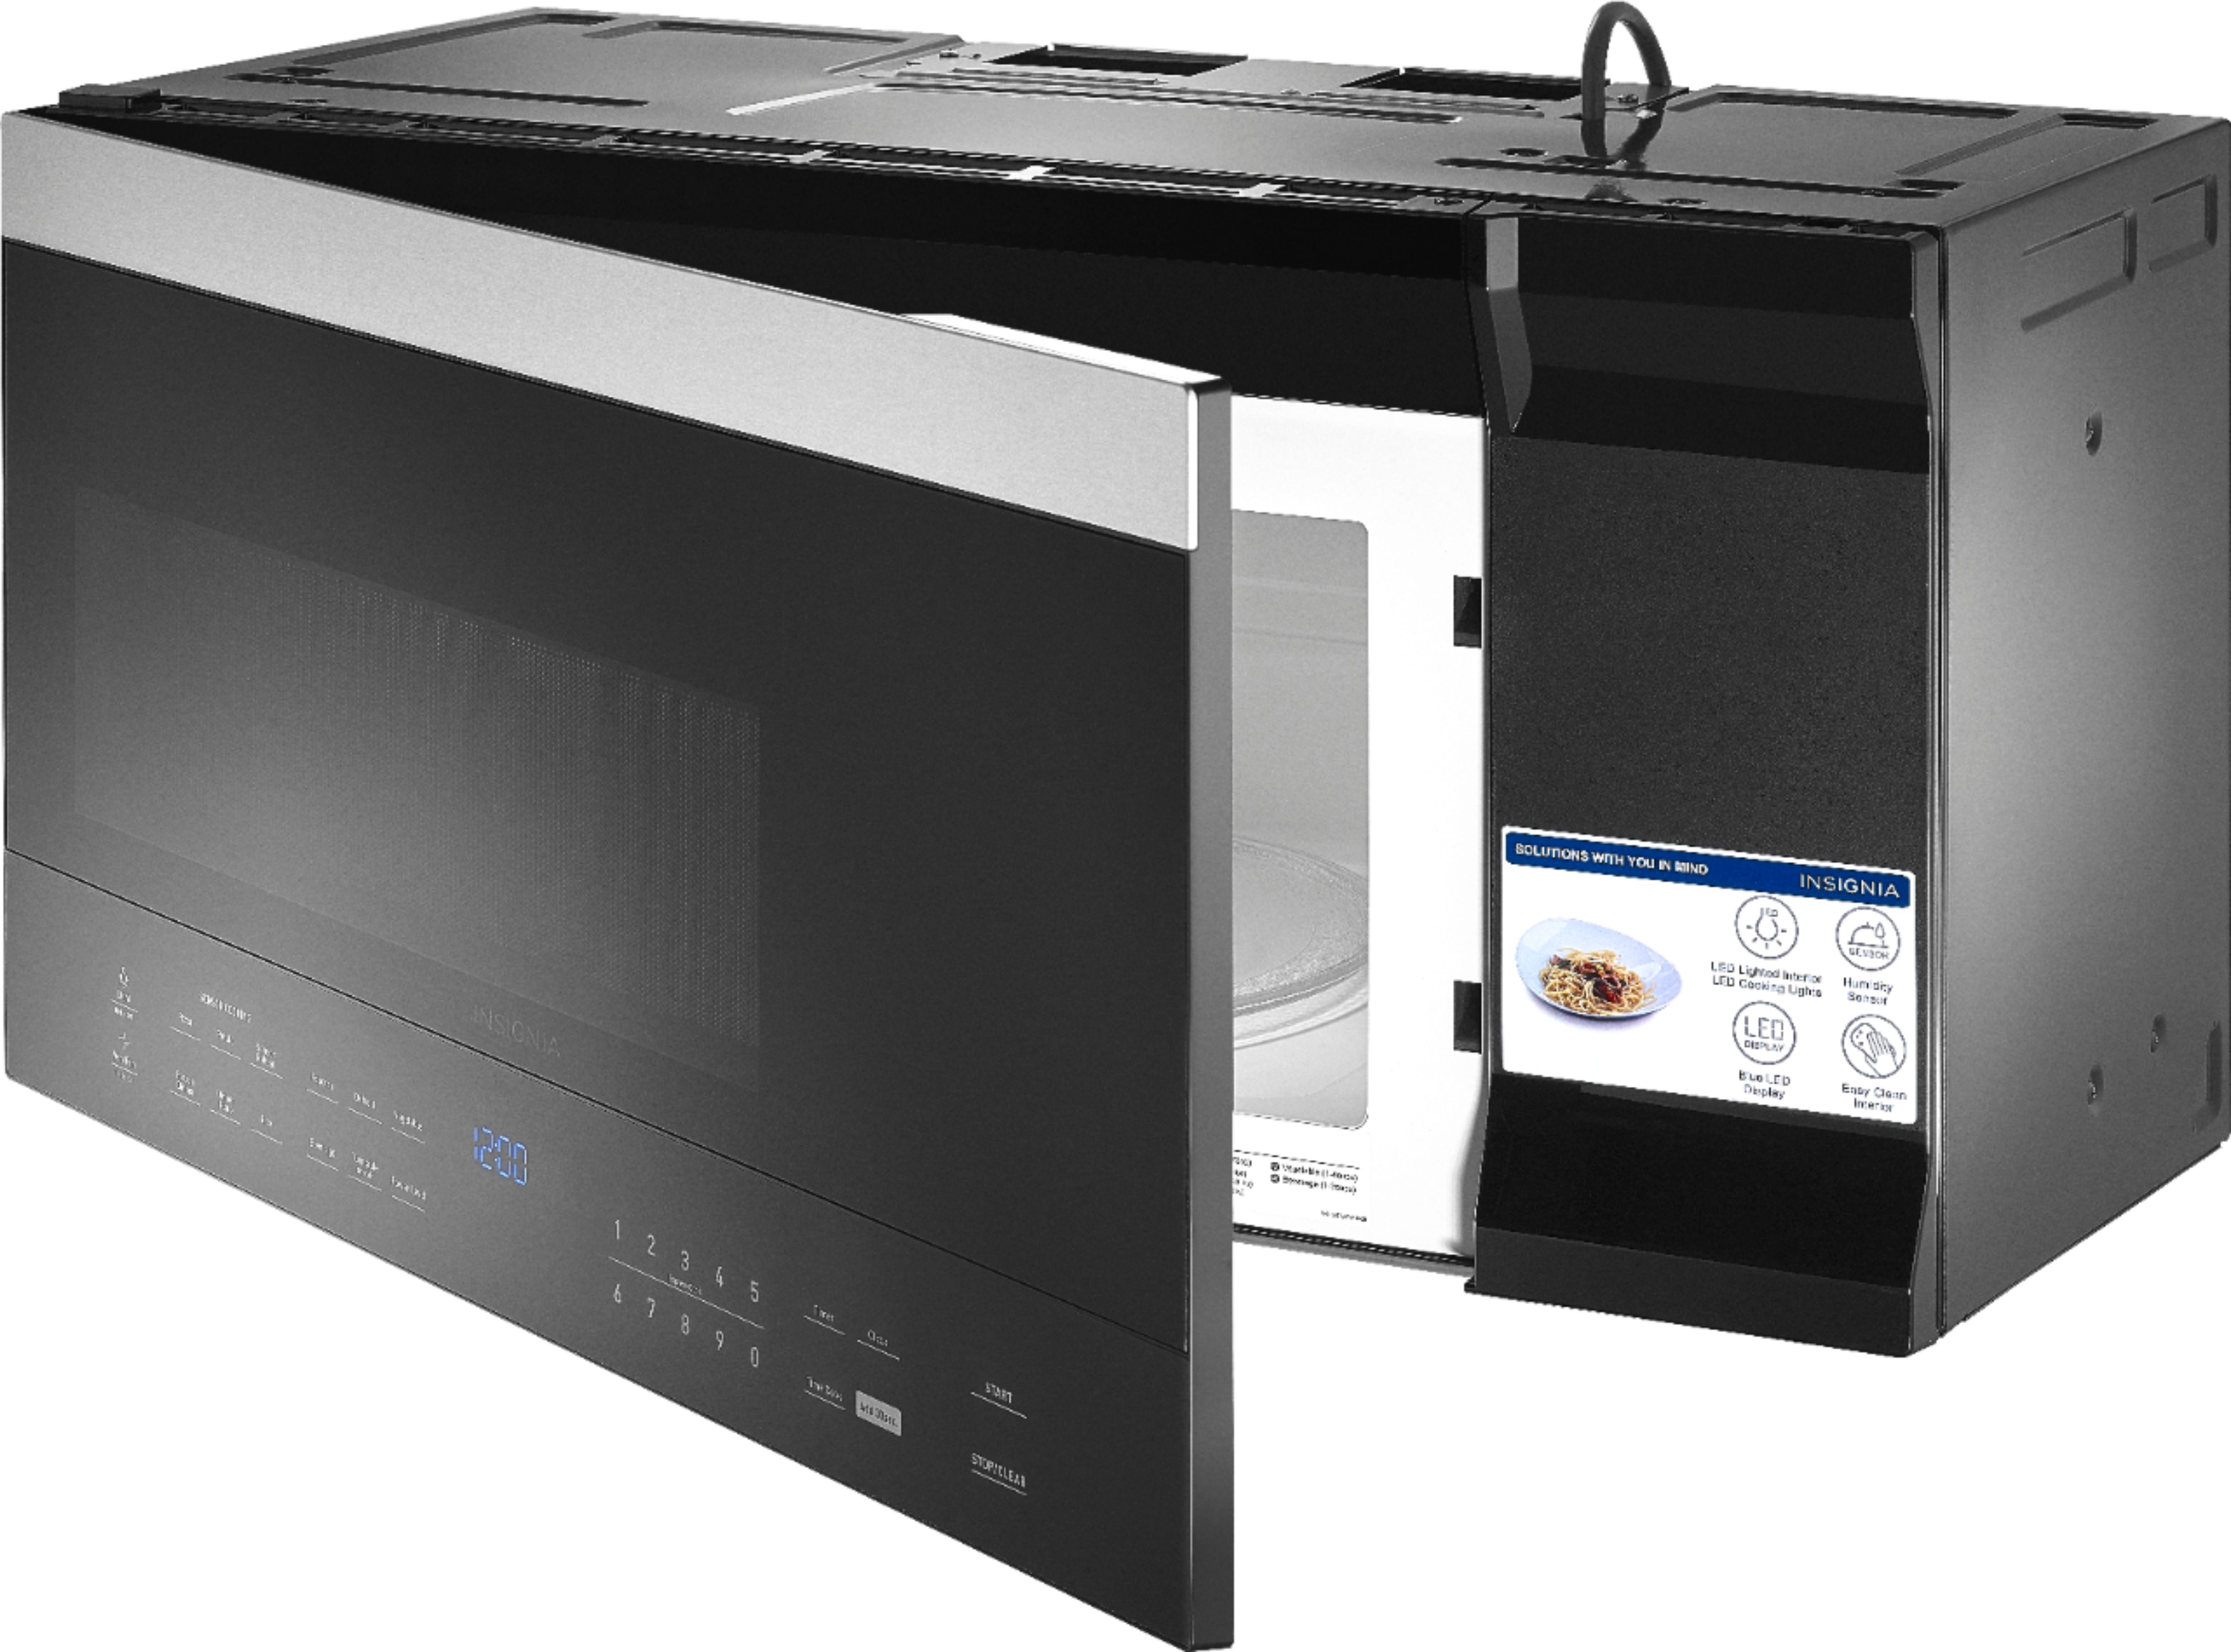 Insignia NS-OTR16SS9 Microwave Oven Review - Consumer Reports